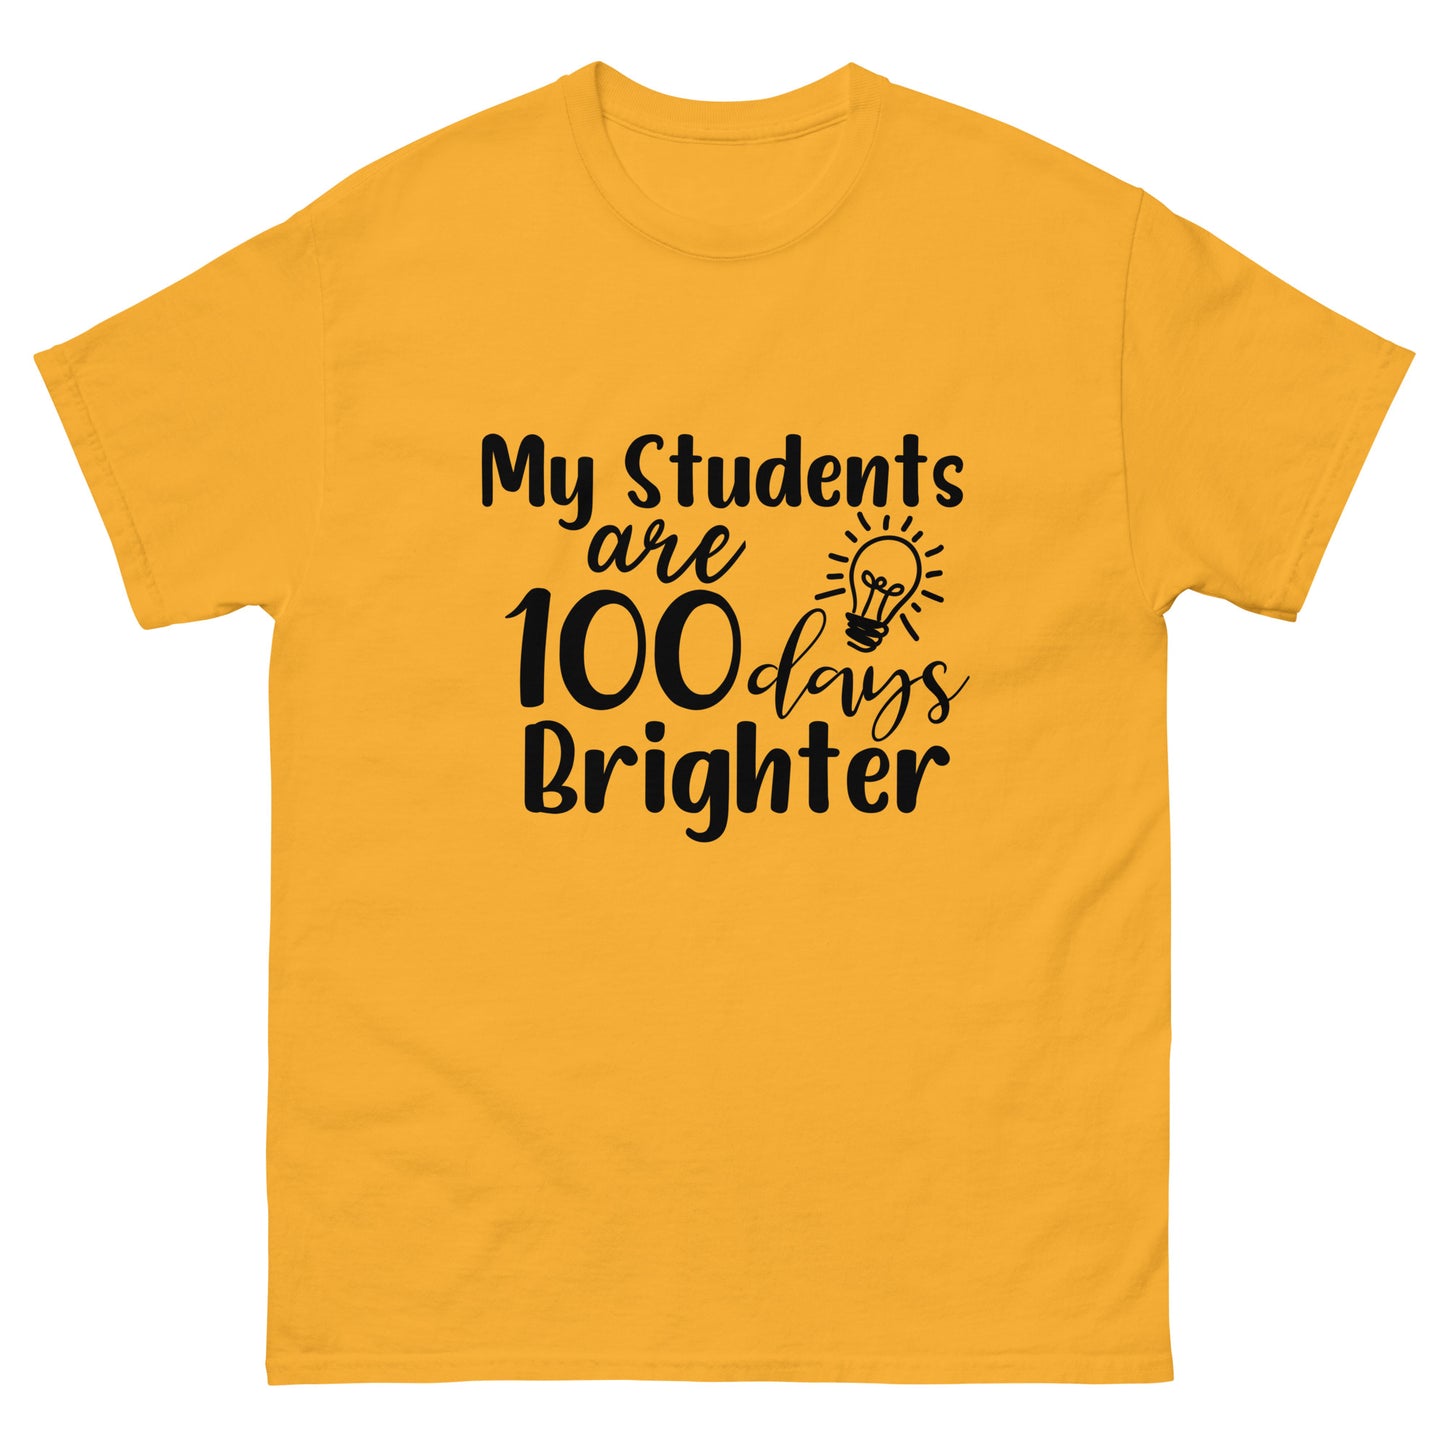 My Student's are 100 days brighter - Teacher - classic tee